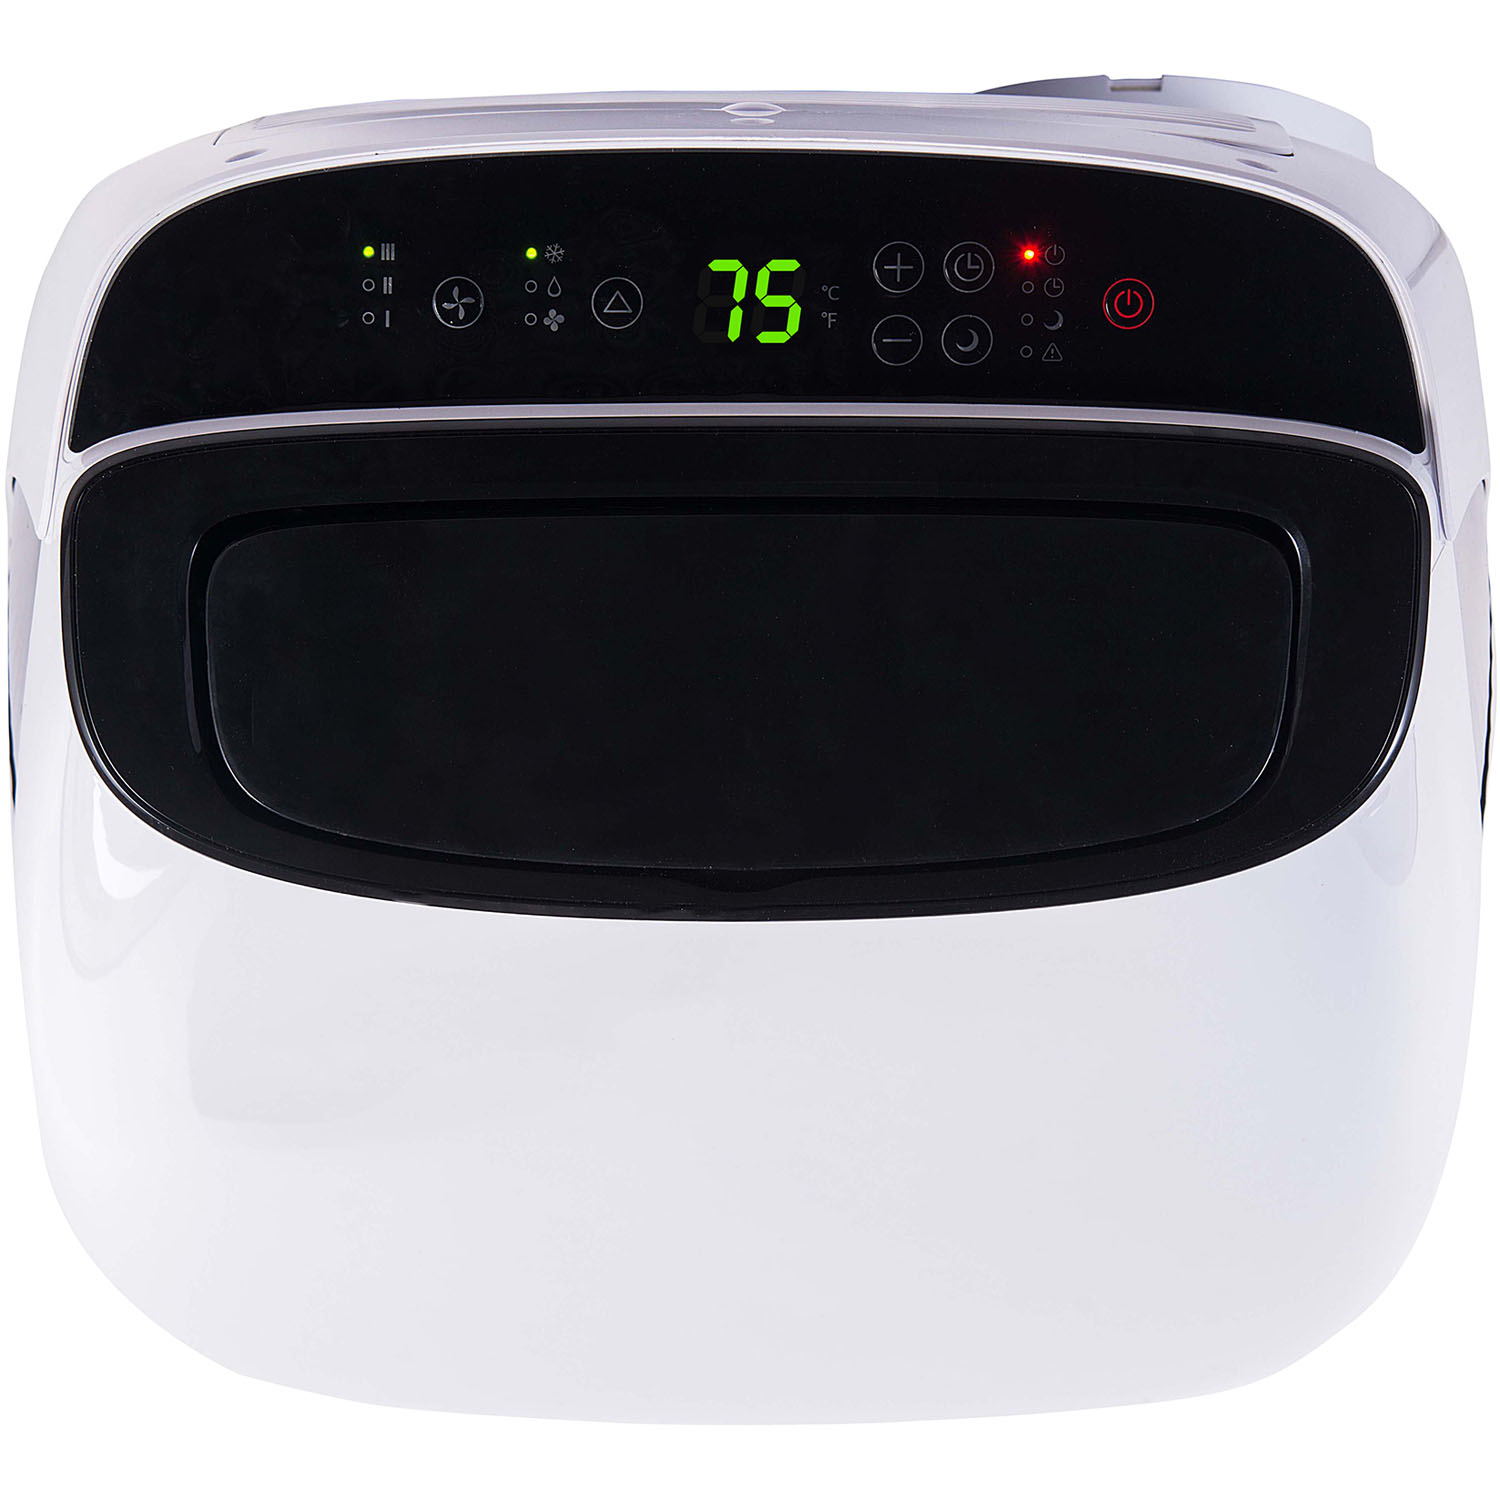 Quilo Portable Air Conditioner with Remote Control for a Room up to 550 Sq. Ft. - image 5 of 9